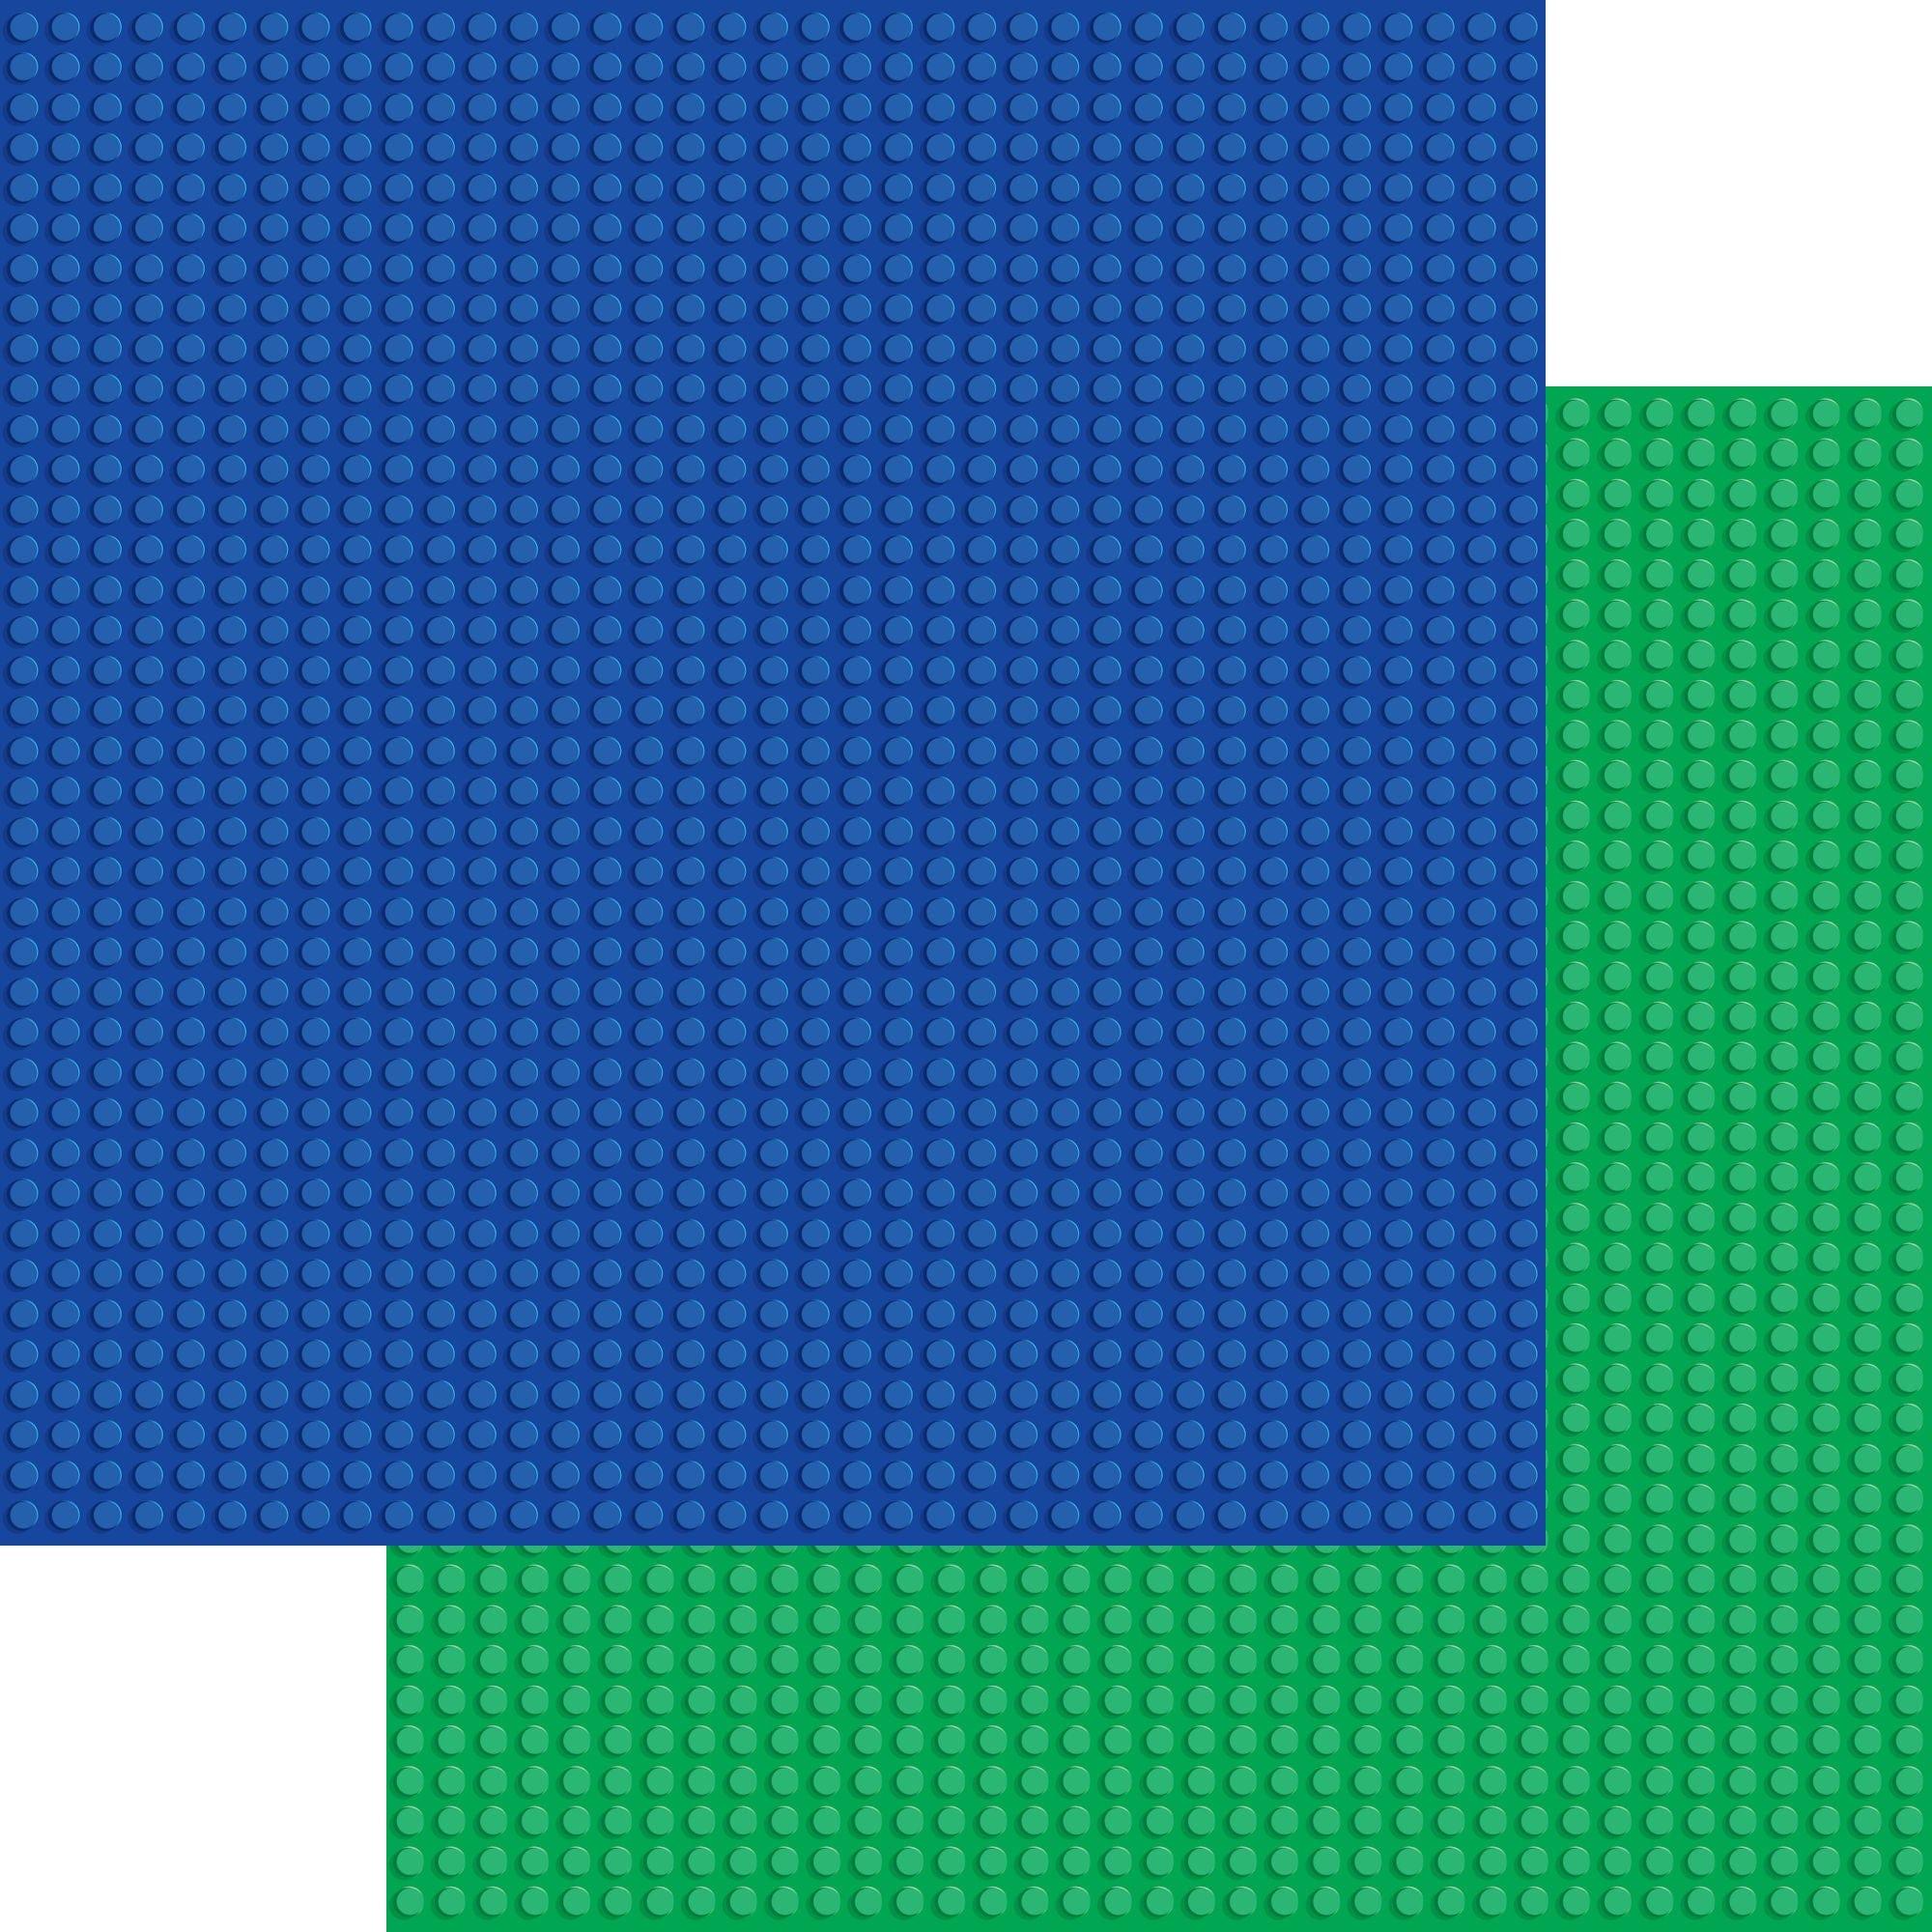 The Building Blocks Collection Blue & Green Blocks 12 x 12 Double-Sided Scrapbook Paper by SSC Designs - Scrapbook Supply Companies